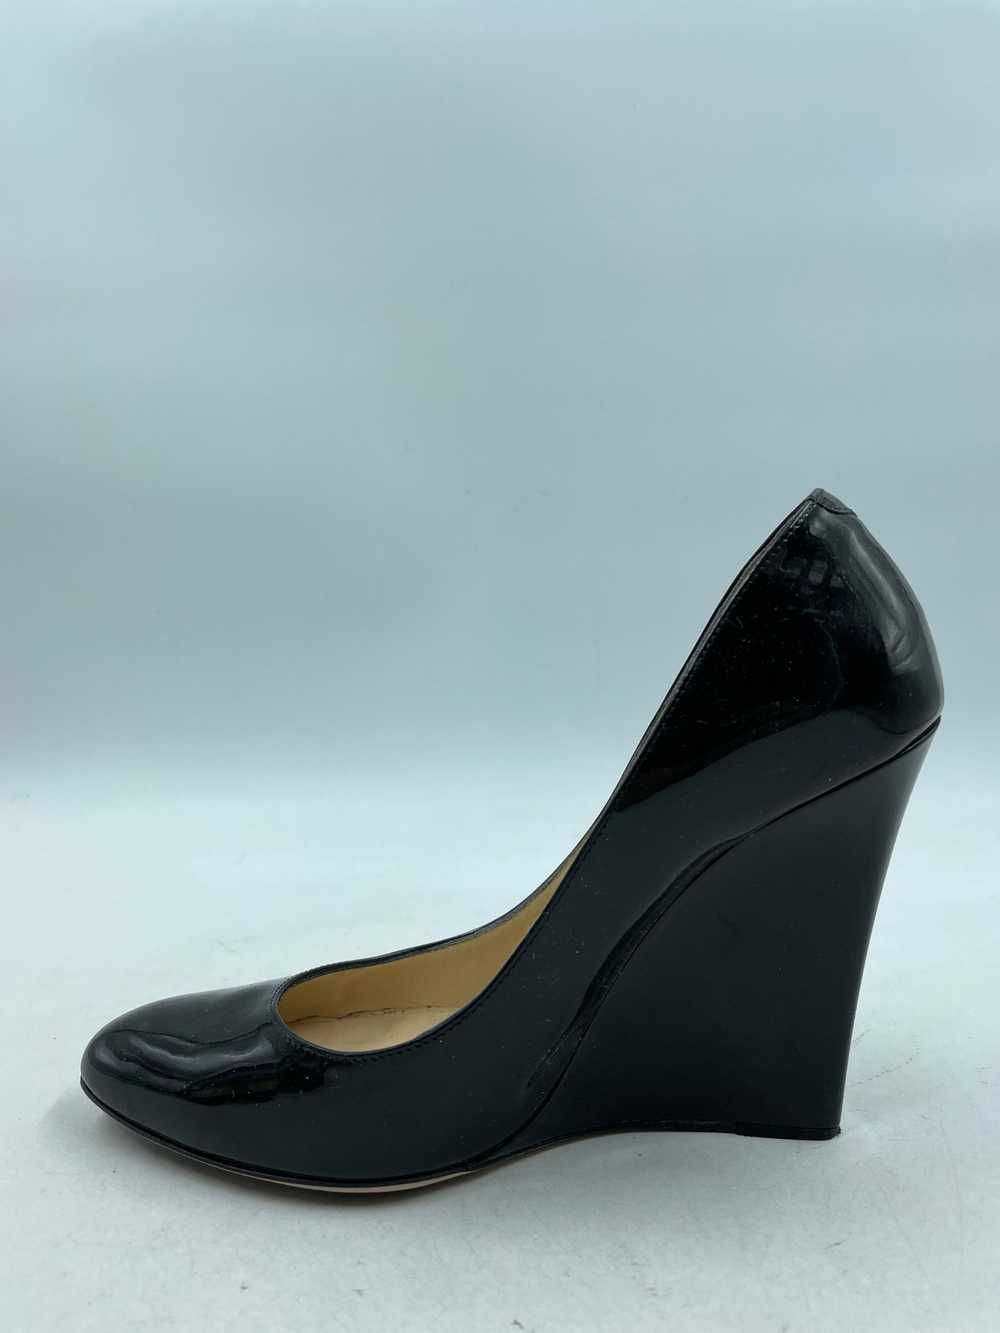 Authentic Jimmy Choo Black Patent Wedge Pumps W 7 - image 2